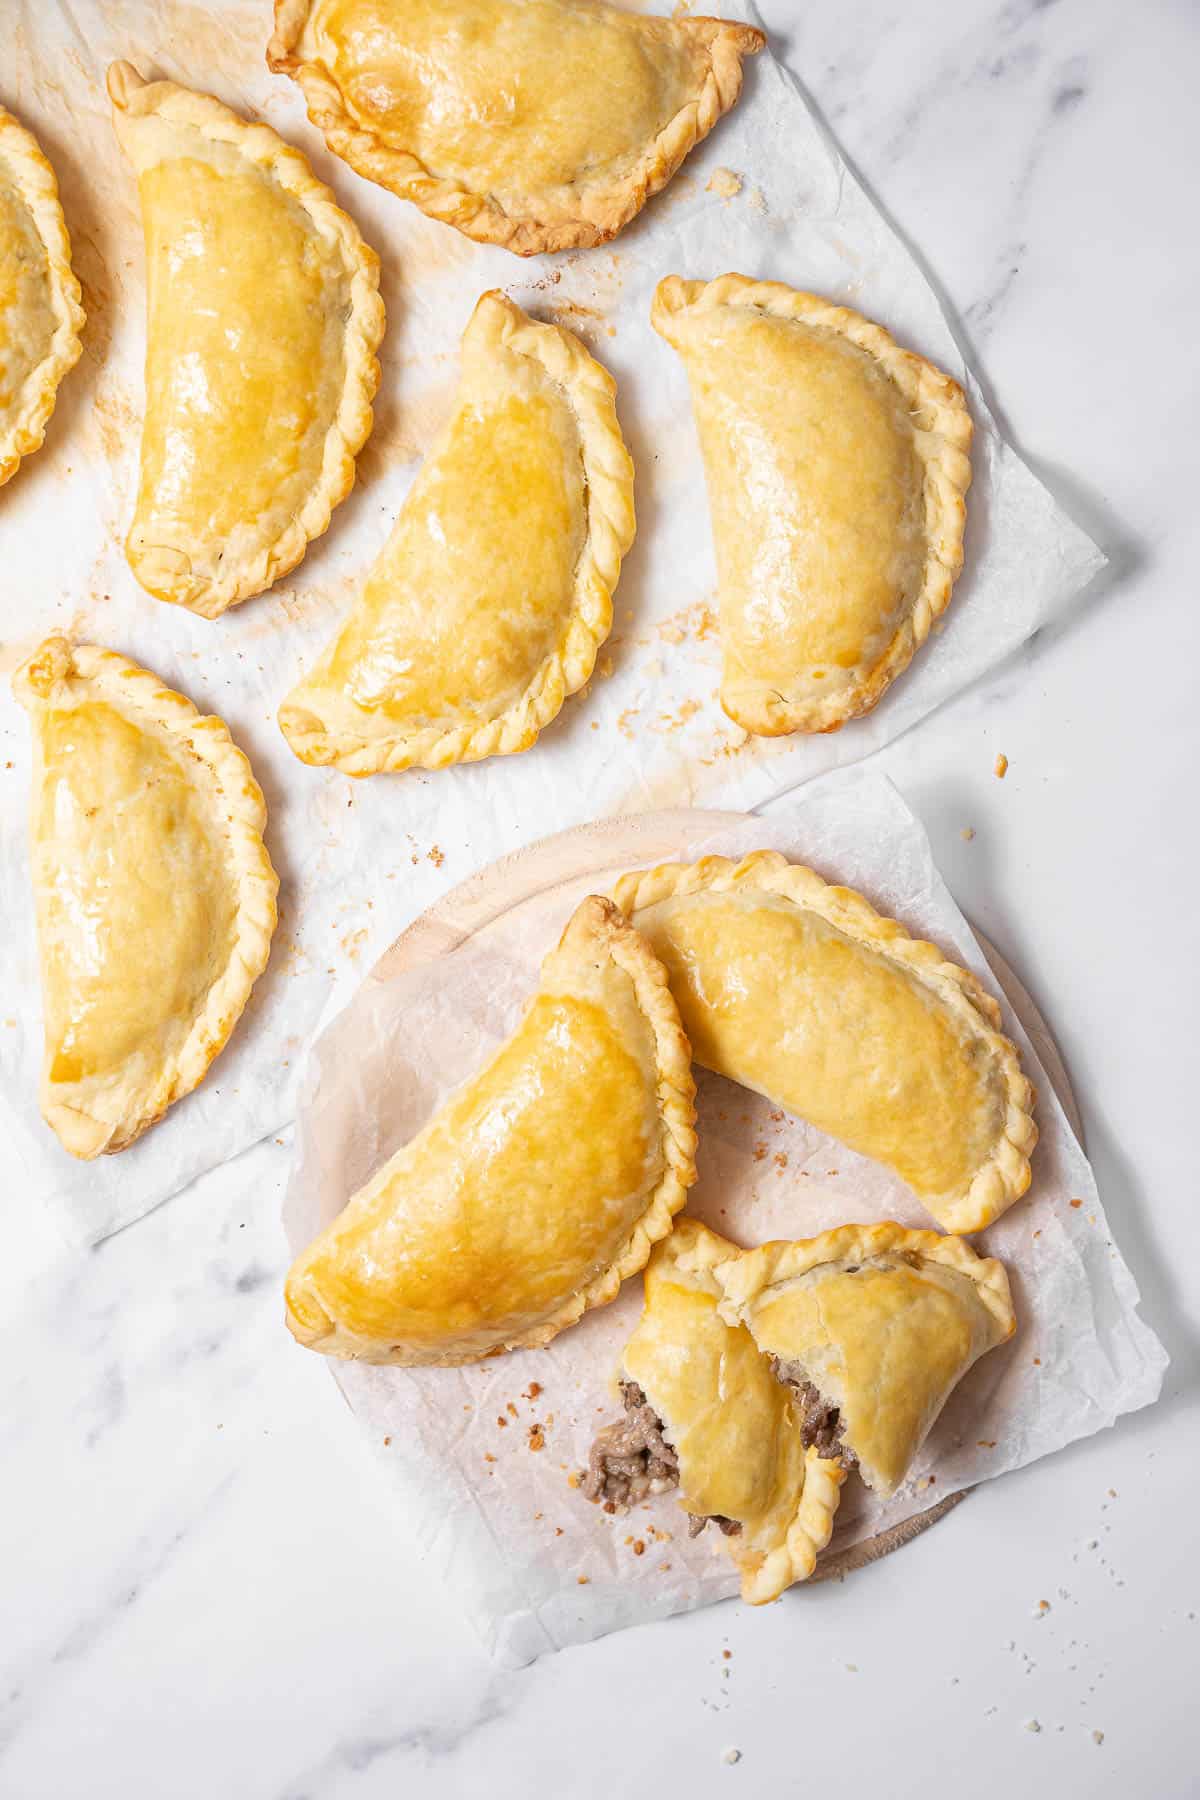 baked empanadas on a plate and on a parchment paper.